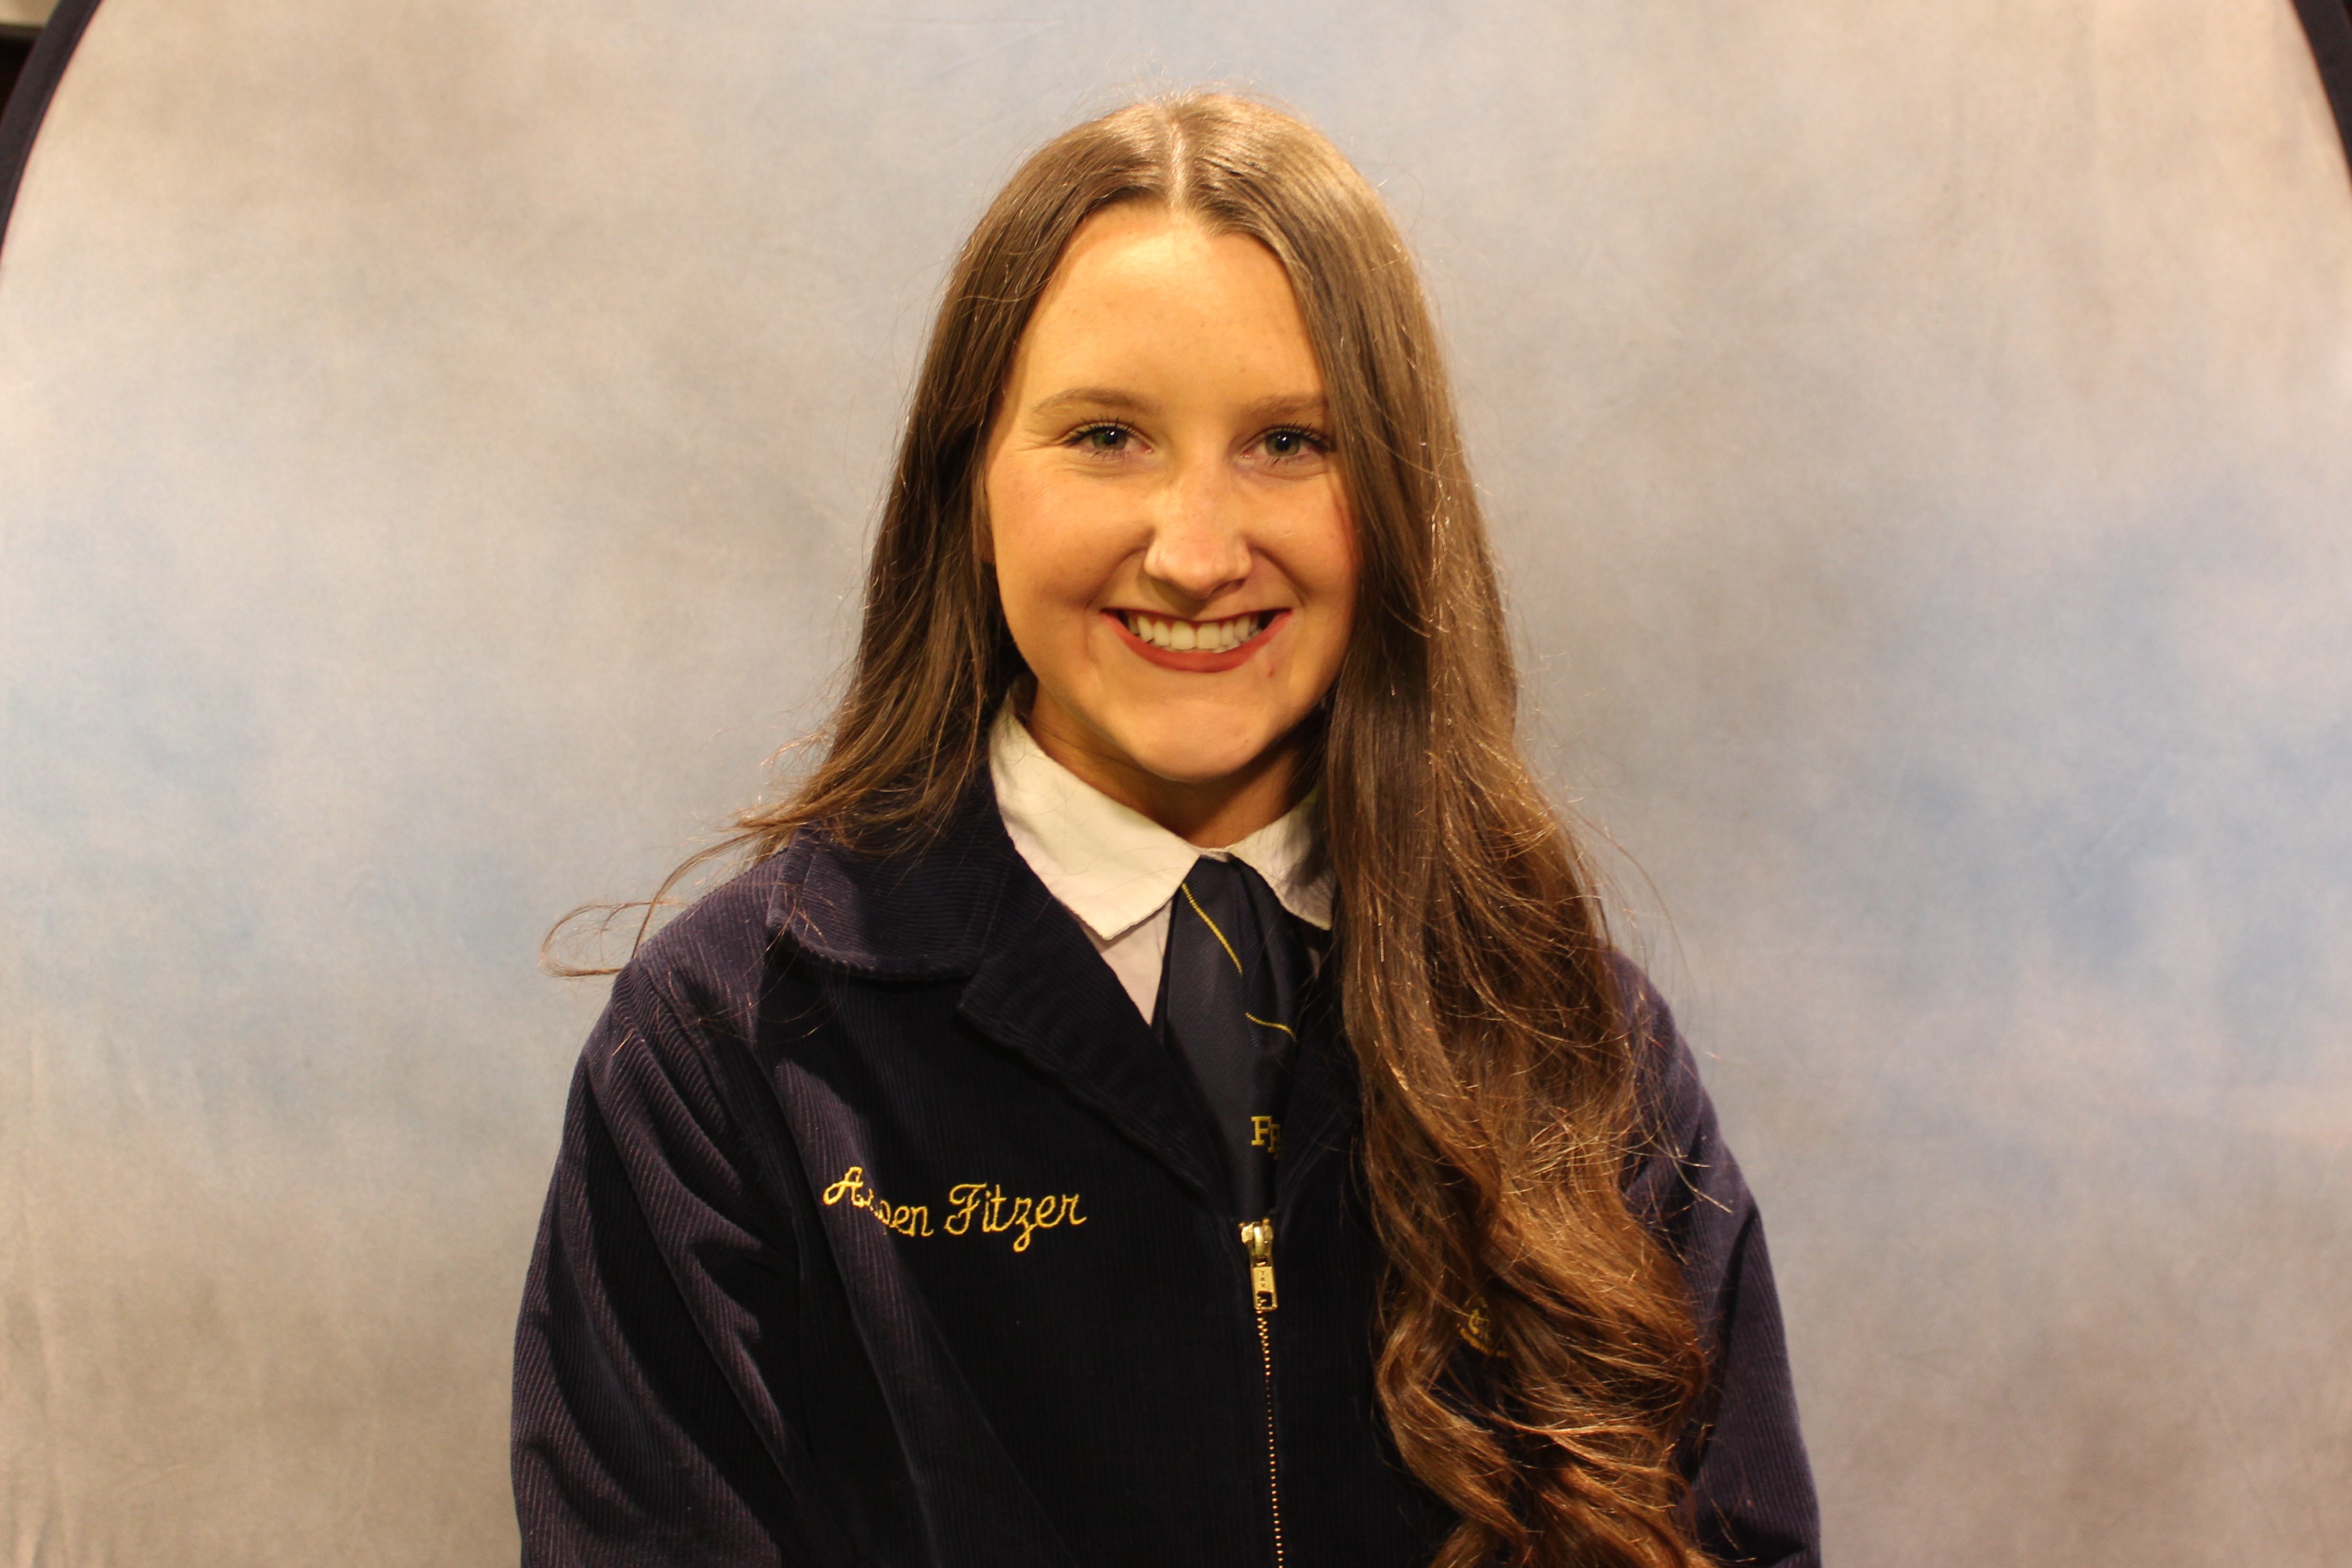 Introducing Aspen Fitzer of the Stigler FFA Chapter, Your 2021 Southeast Area Star in Agribusiness